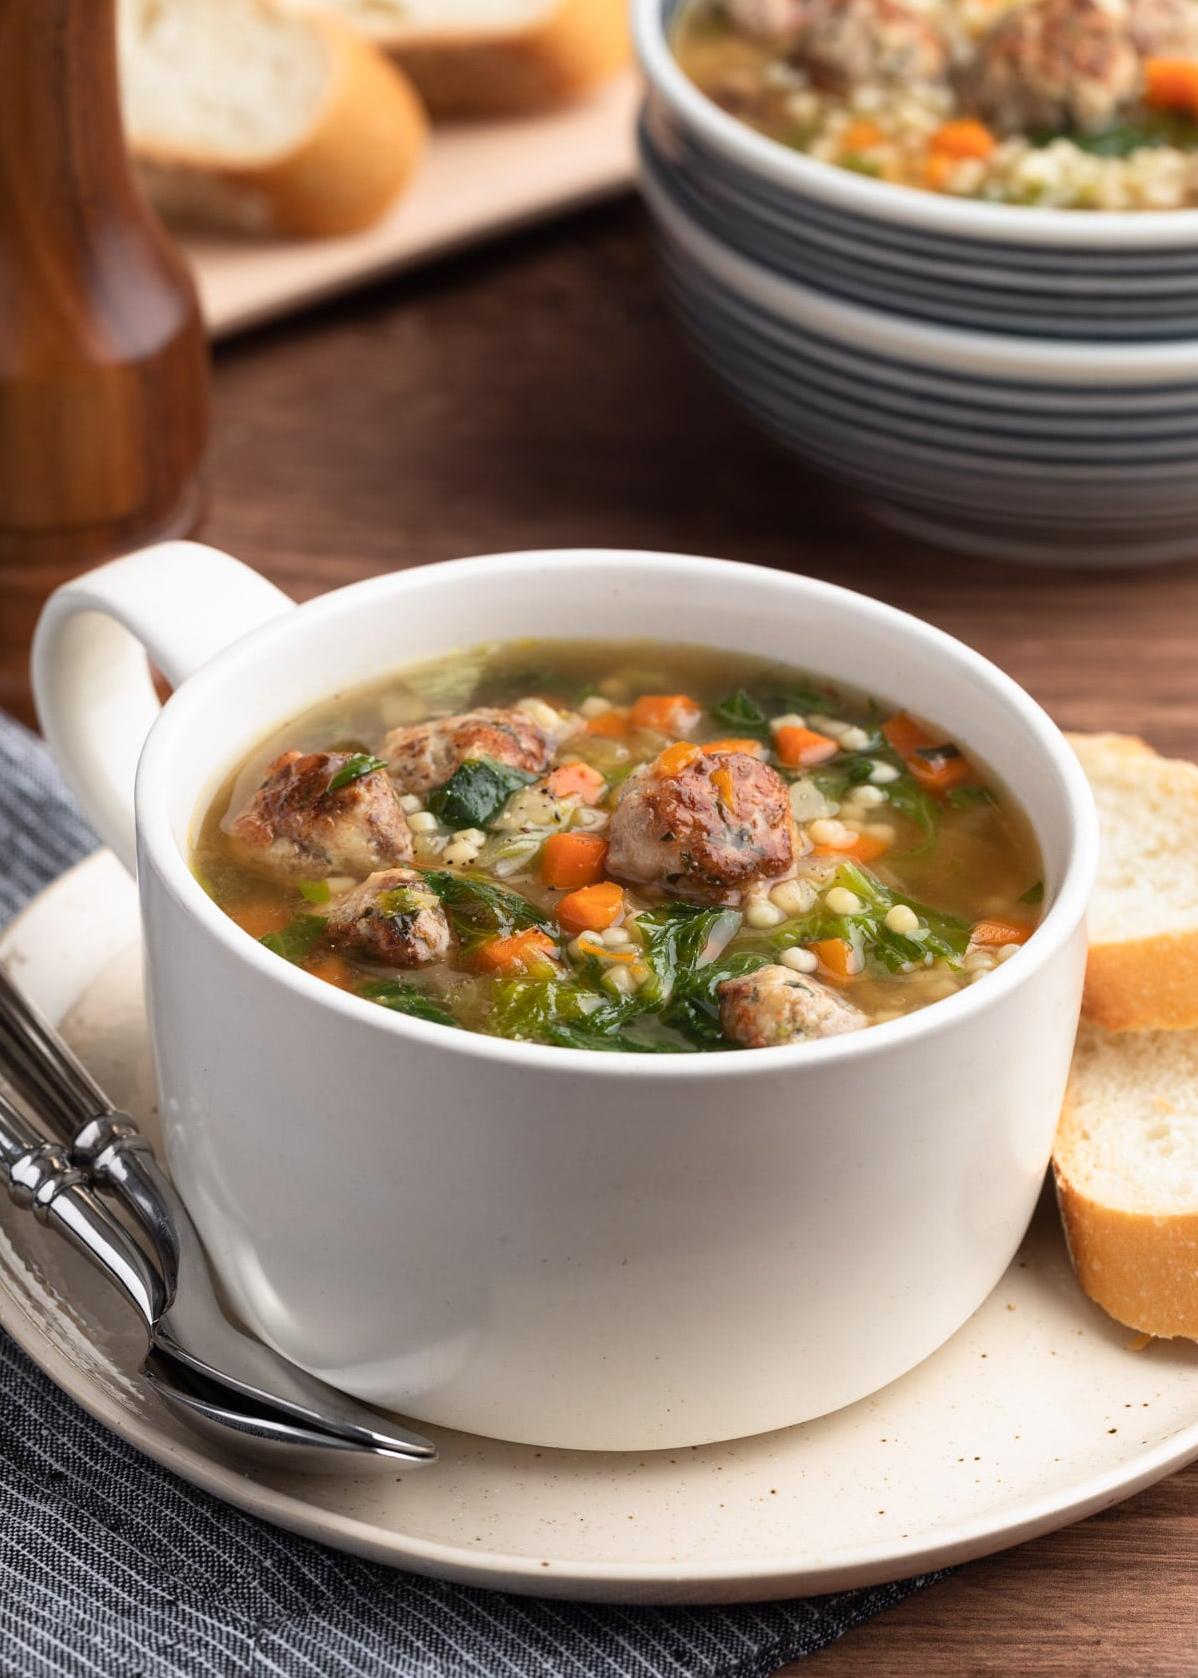  This savory soup is the perfect hearty meal for chilly evenings at home.